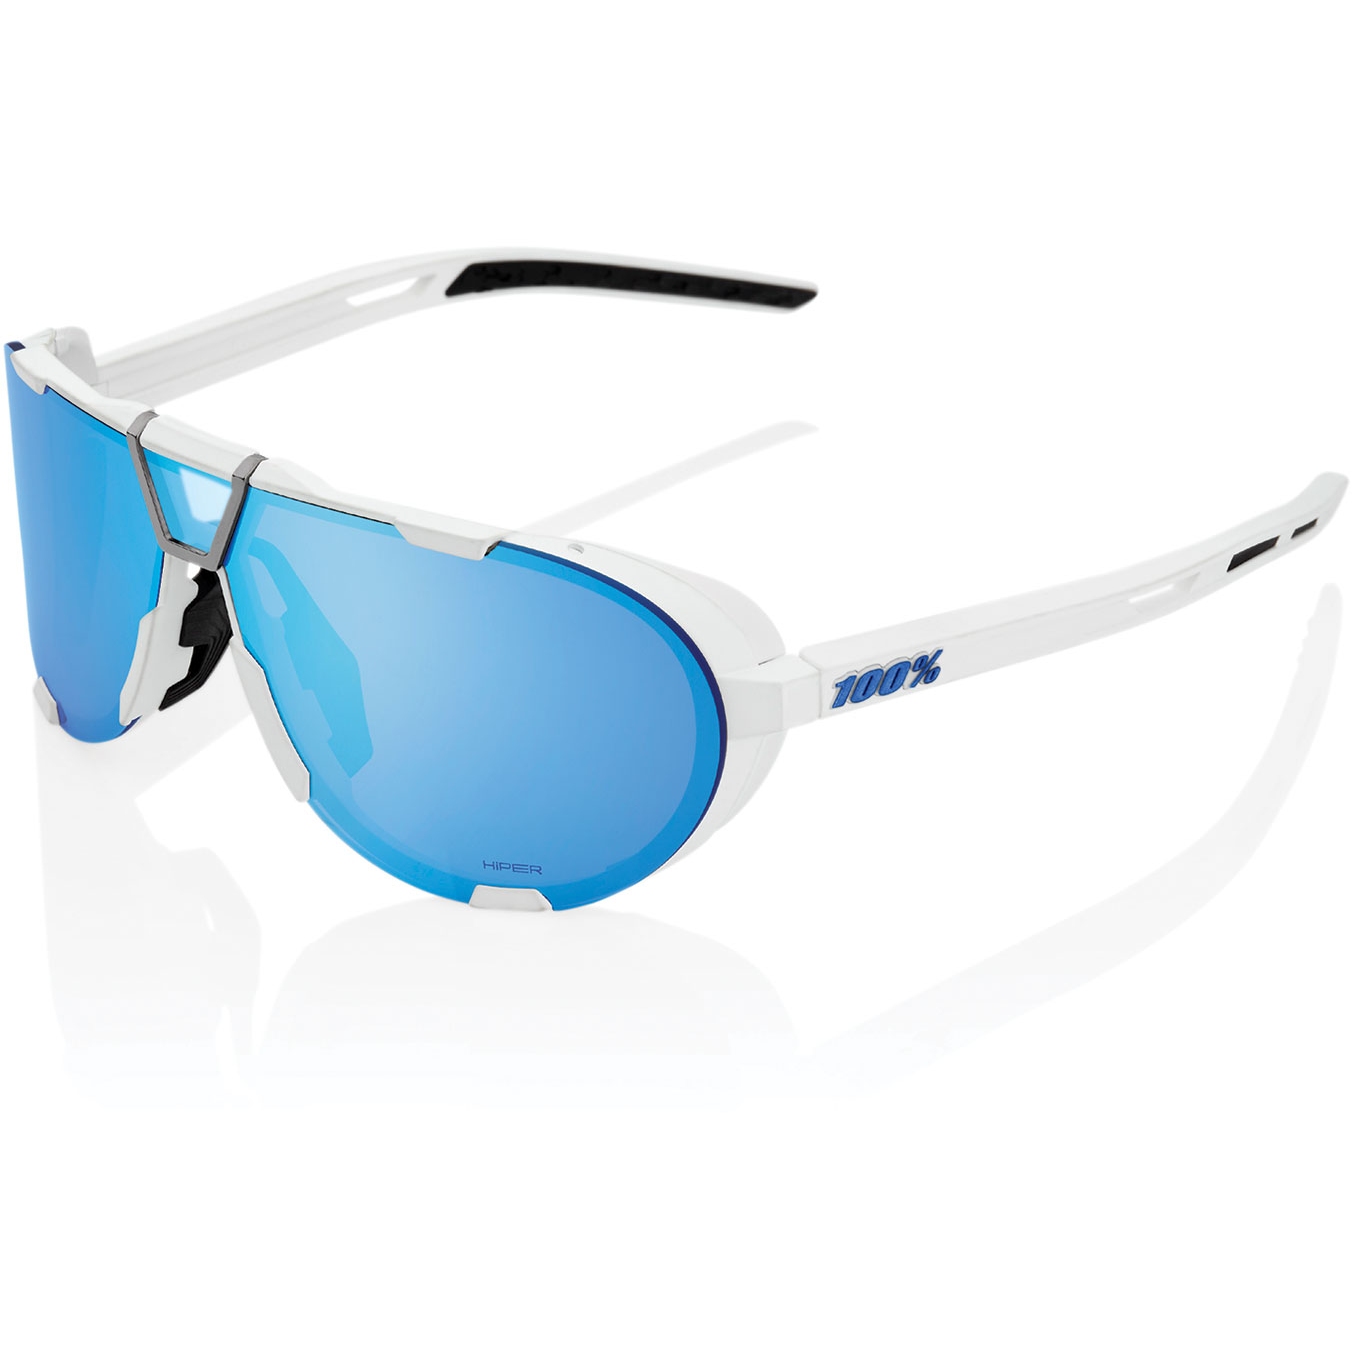 Productfoto van 100% Westcraft Glasses - HiPER Mirror Lens - Soft Tact White / Blue Multilayer